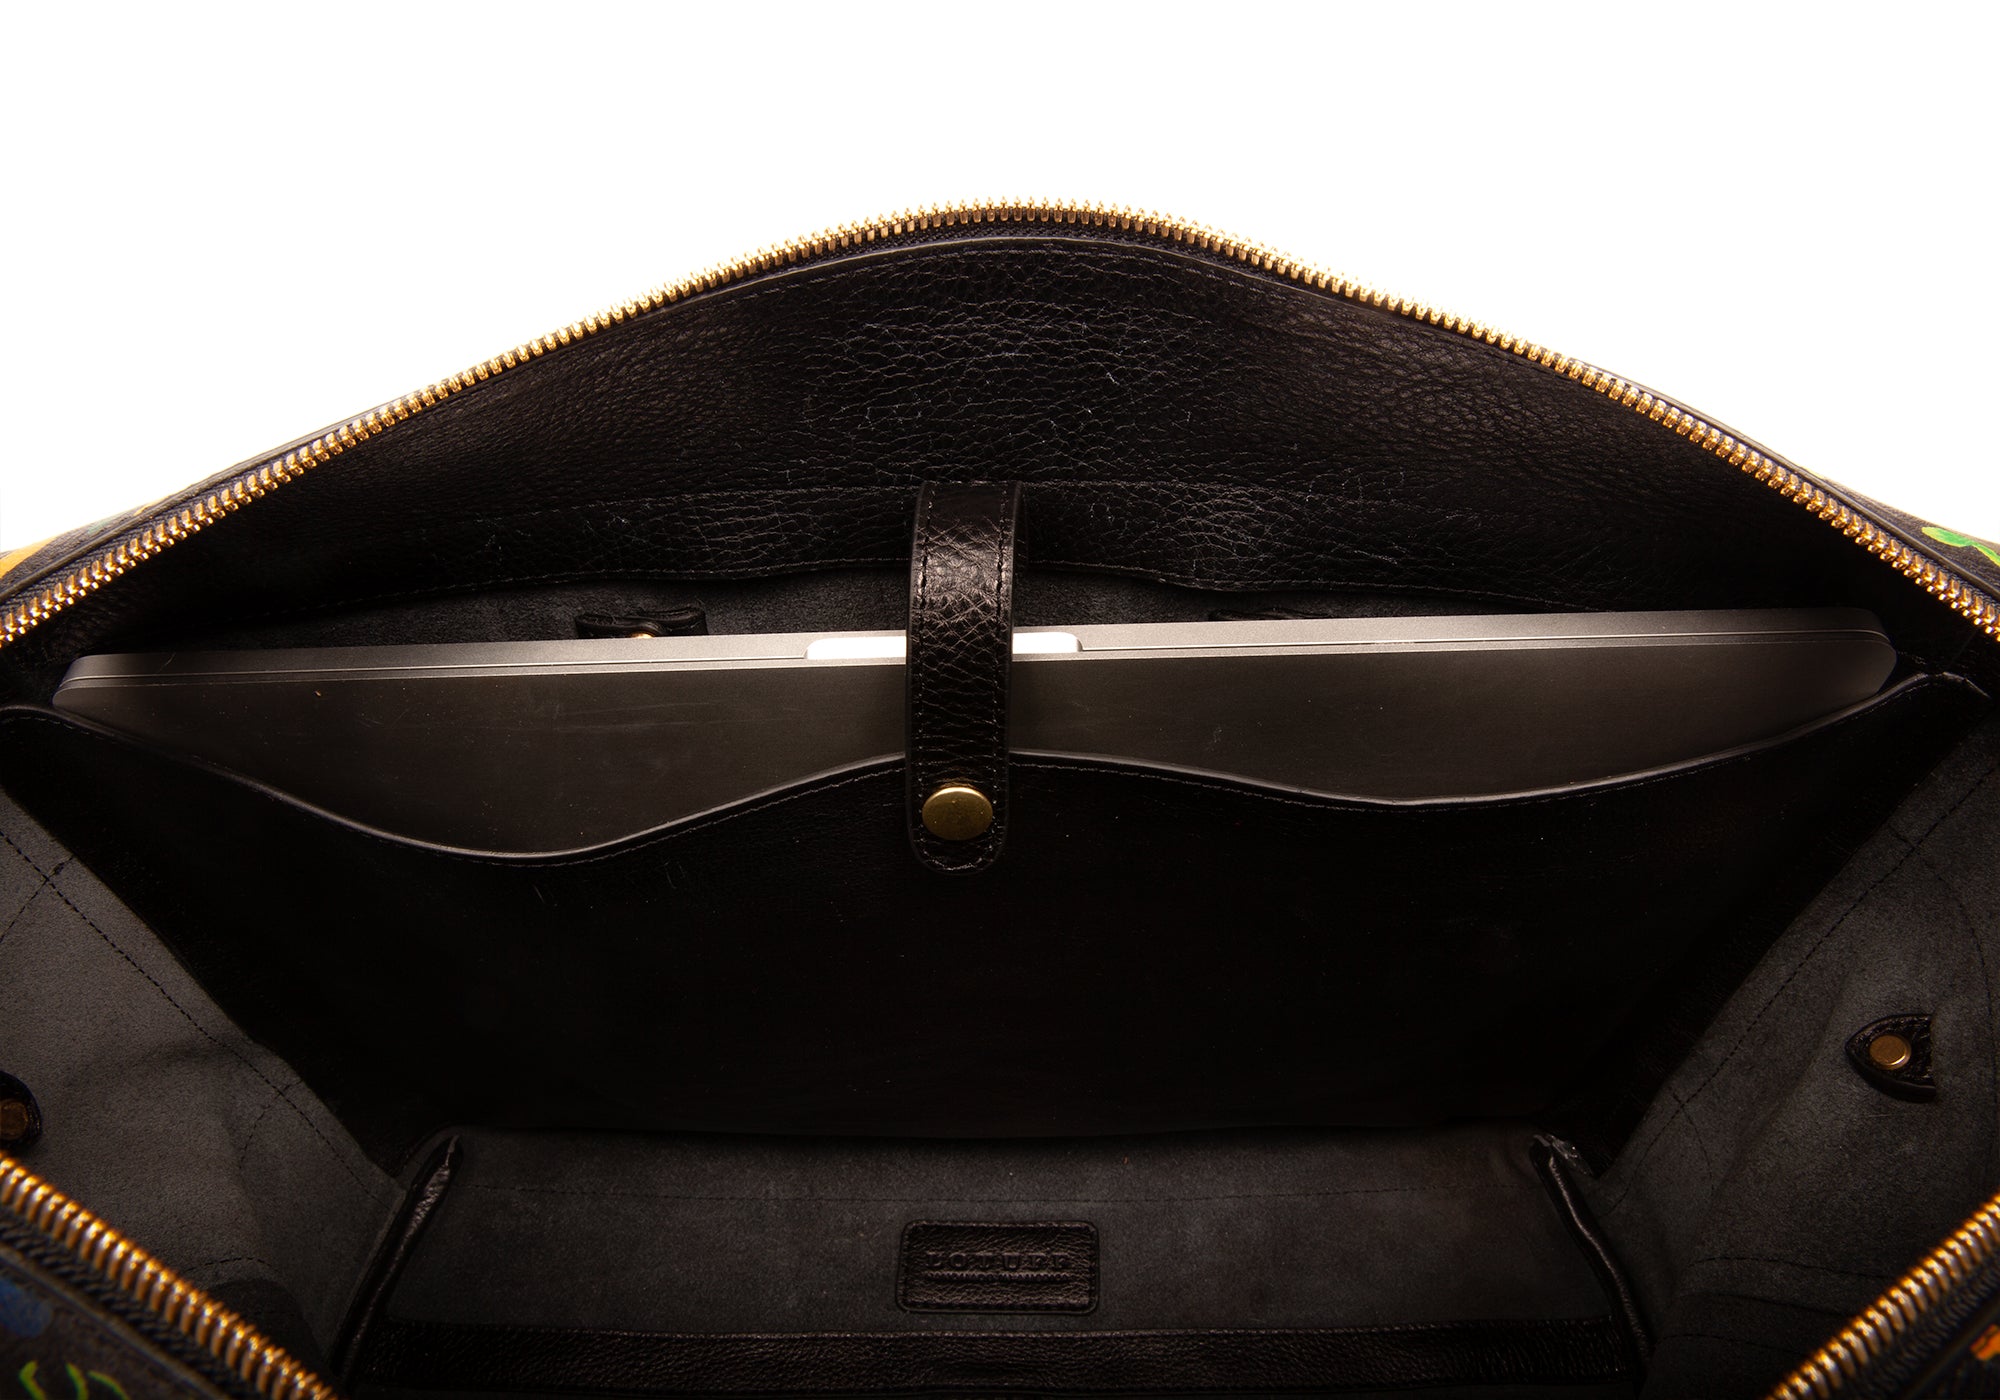 The Handpainted 929 Briefcase Black